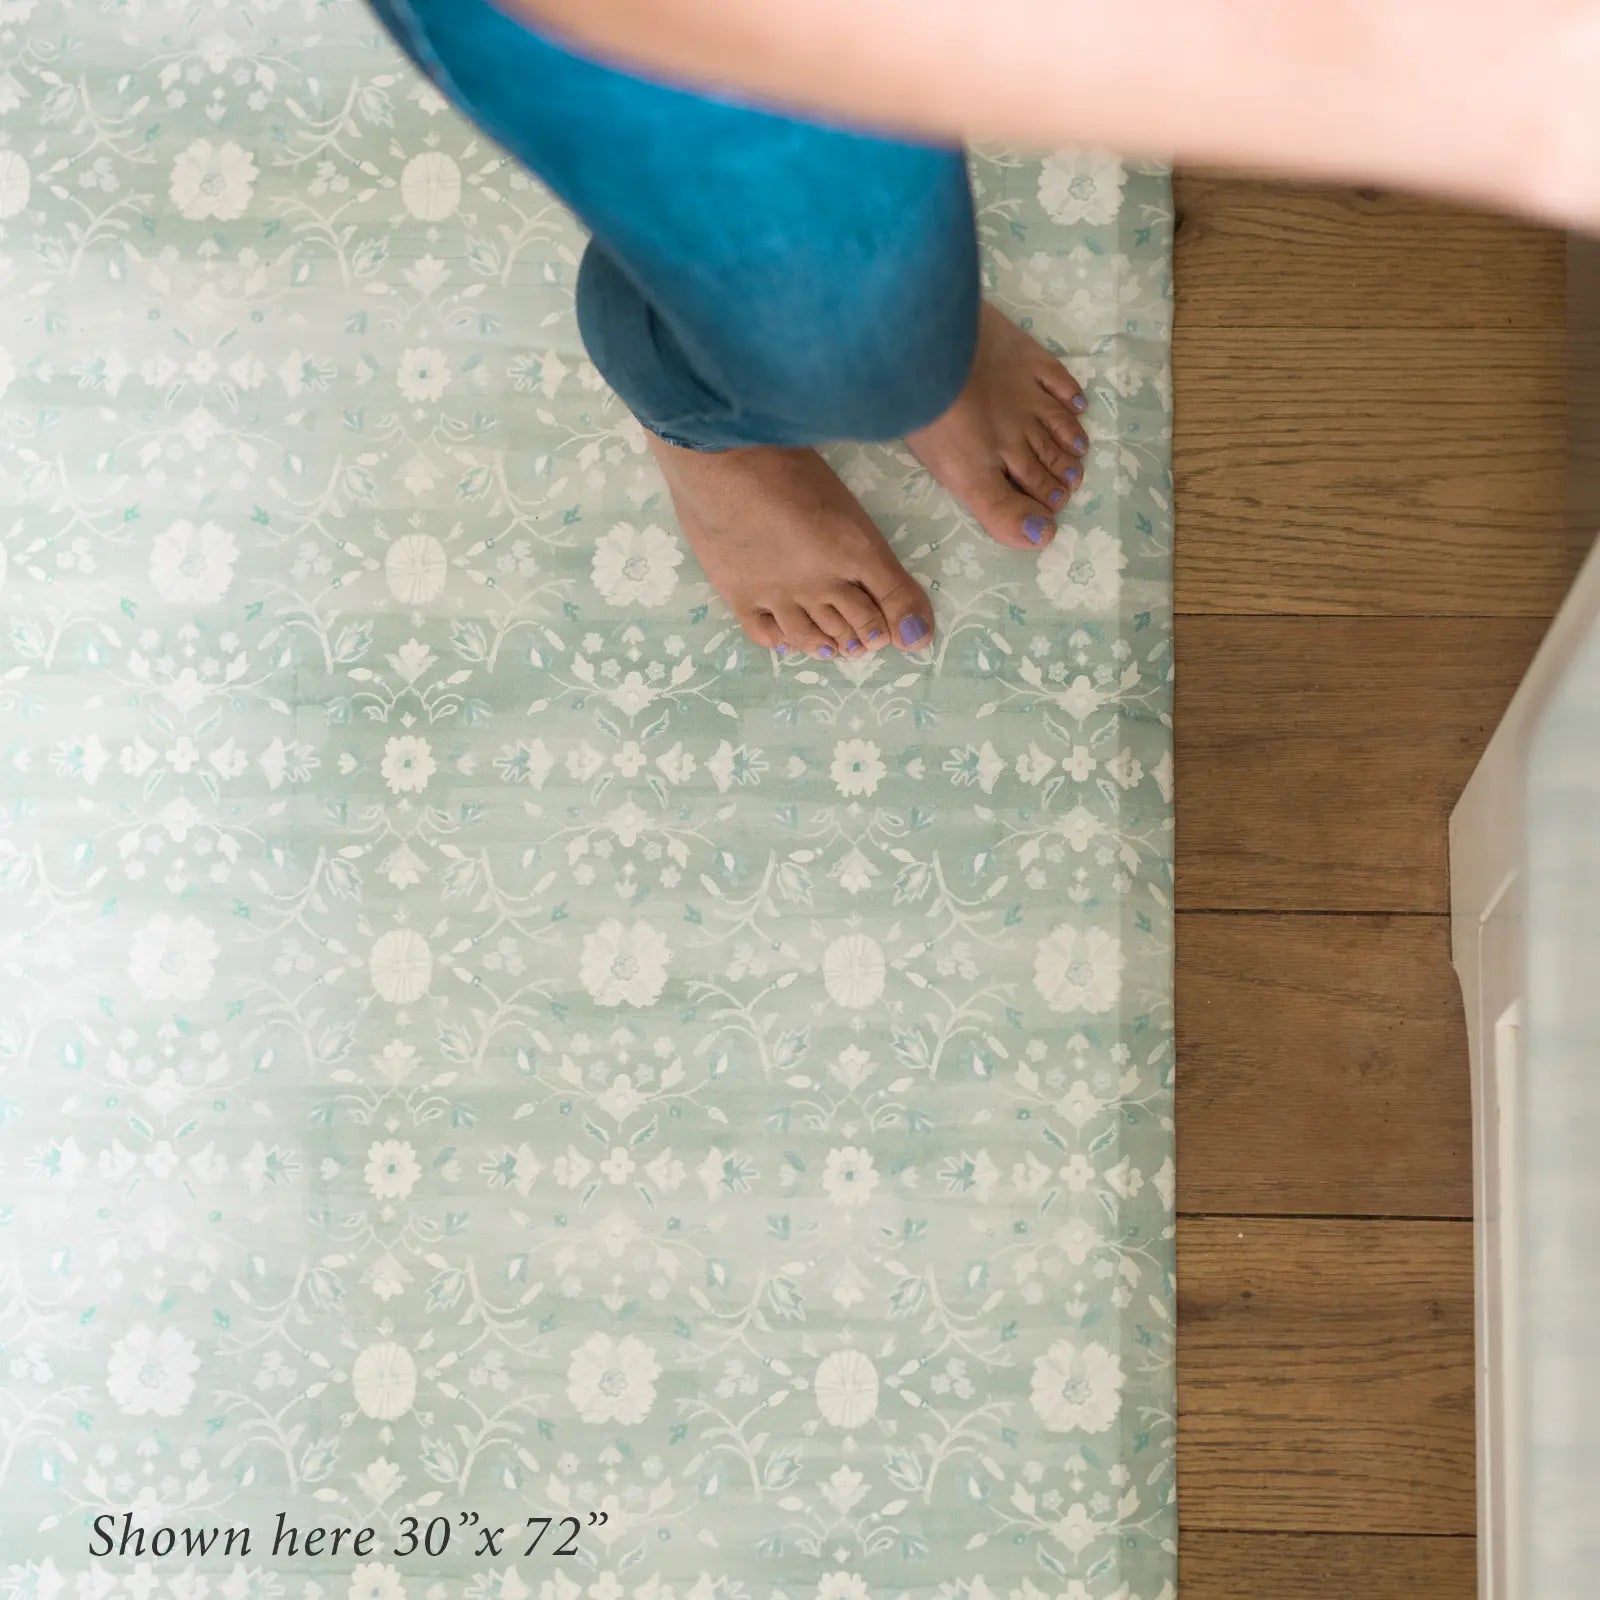 Nama standing mat Gemma white sage green floral shown from above with womans feet in size size 30x72